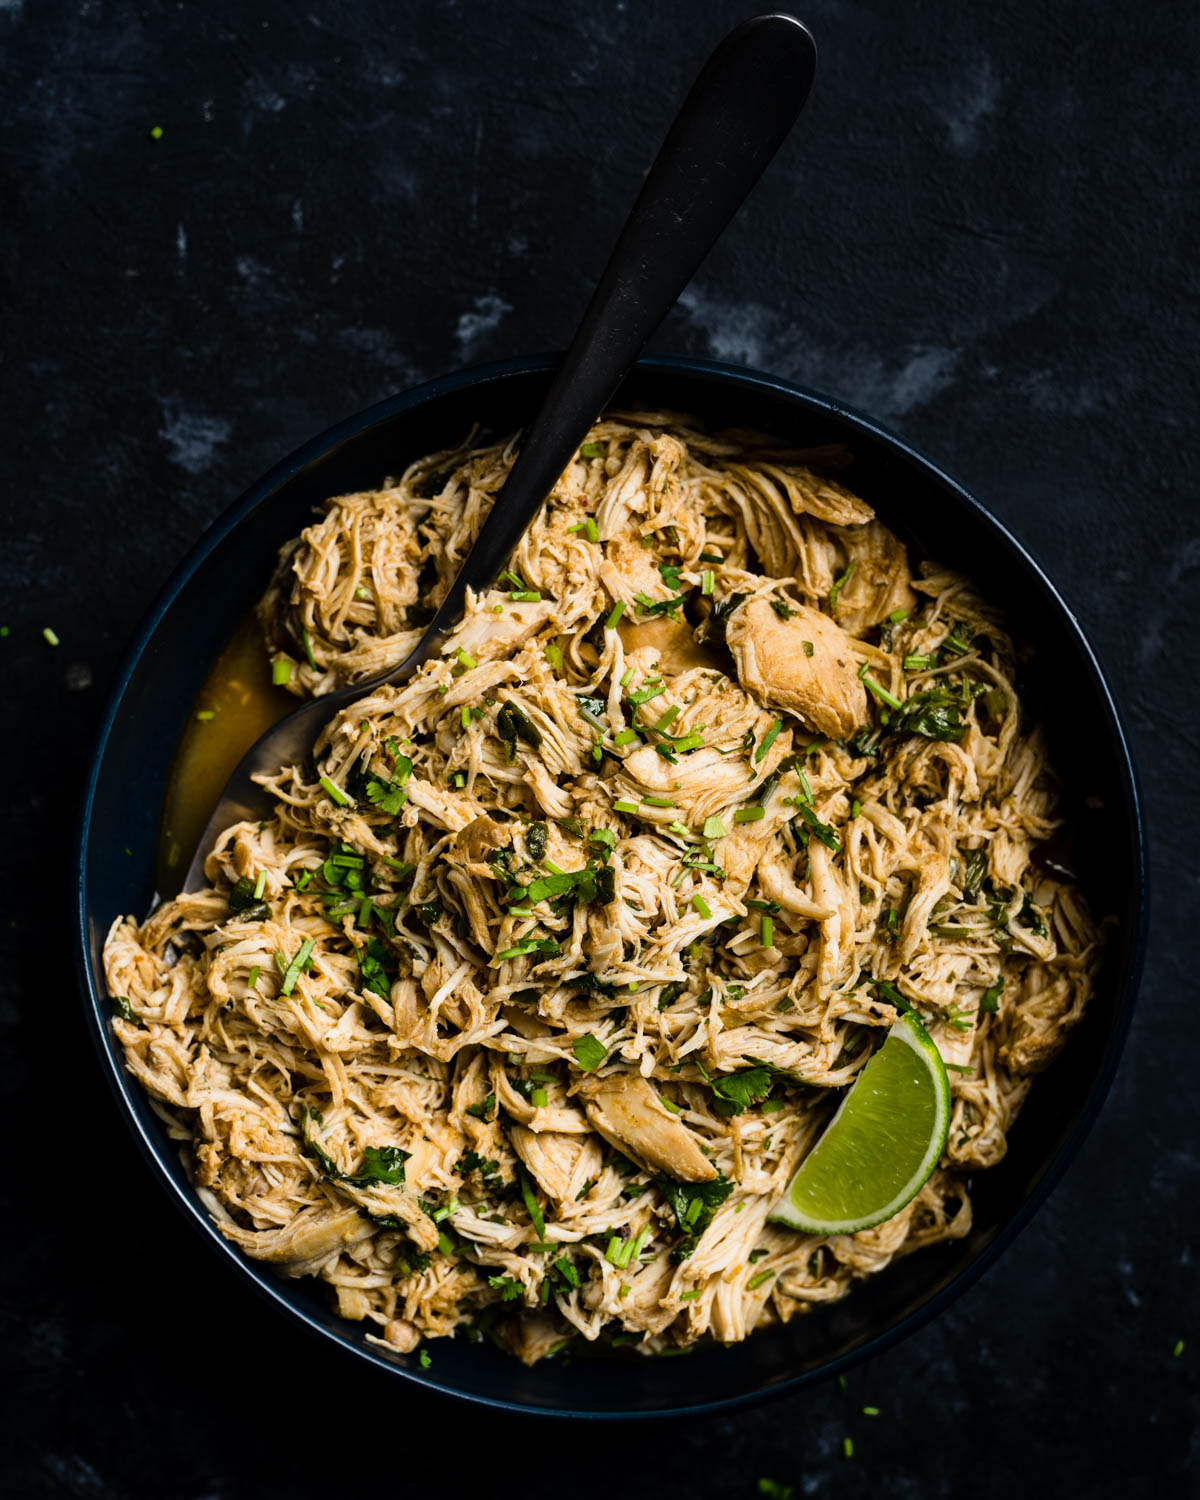 A bowl of shredded slow cooker cilantro lime chicken on a dark black chalkboard background.